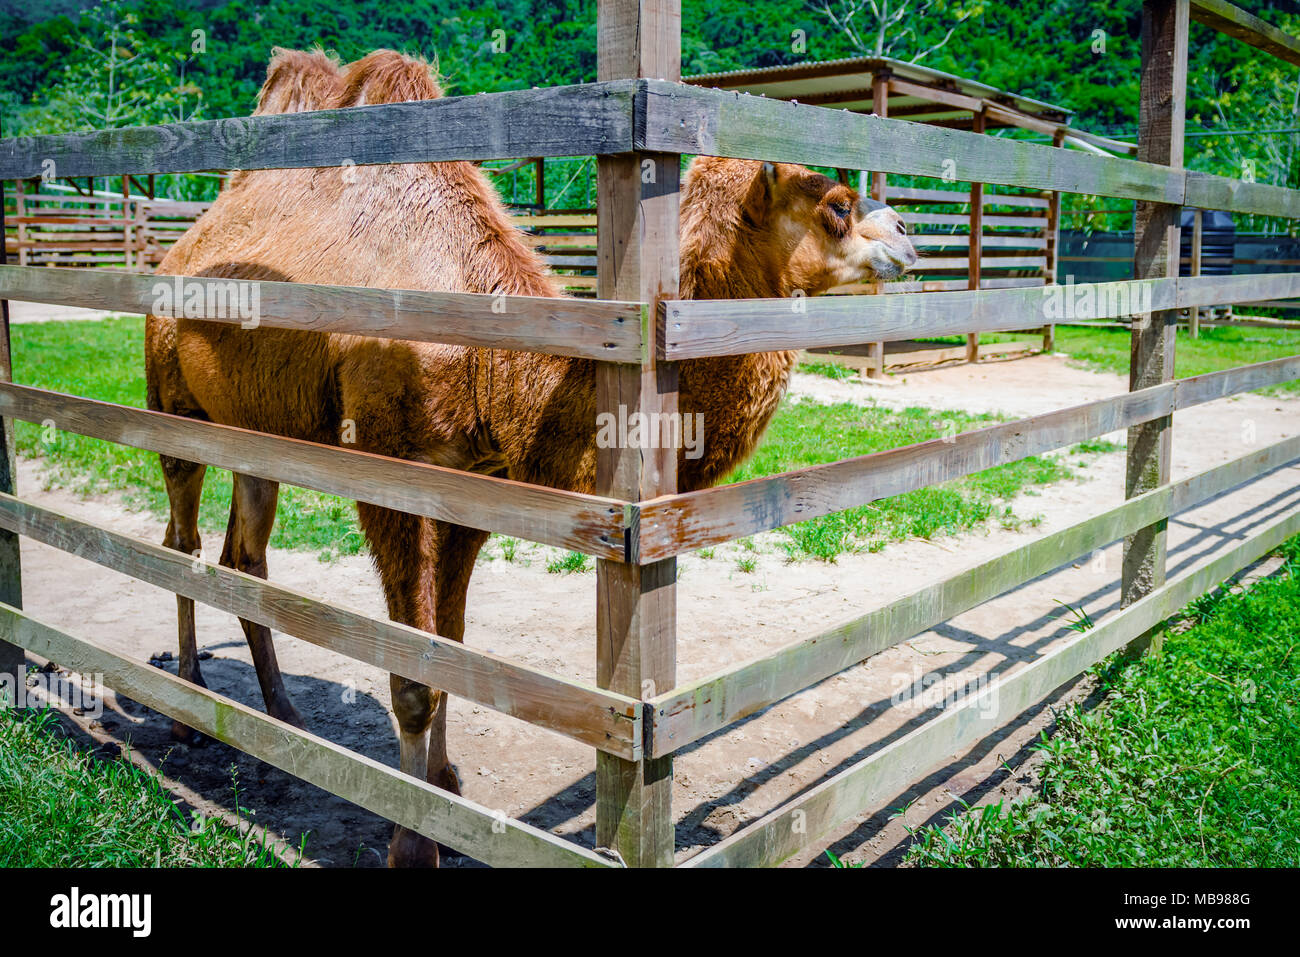 Two humps camel in its pen petting farm zoo outdoors captive animal domesticated brown fluffy Stock Photo